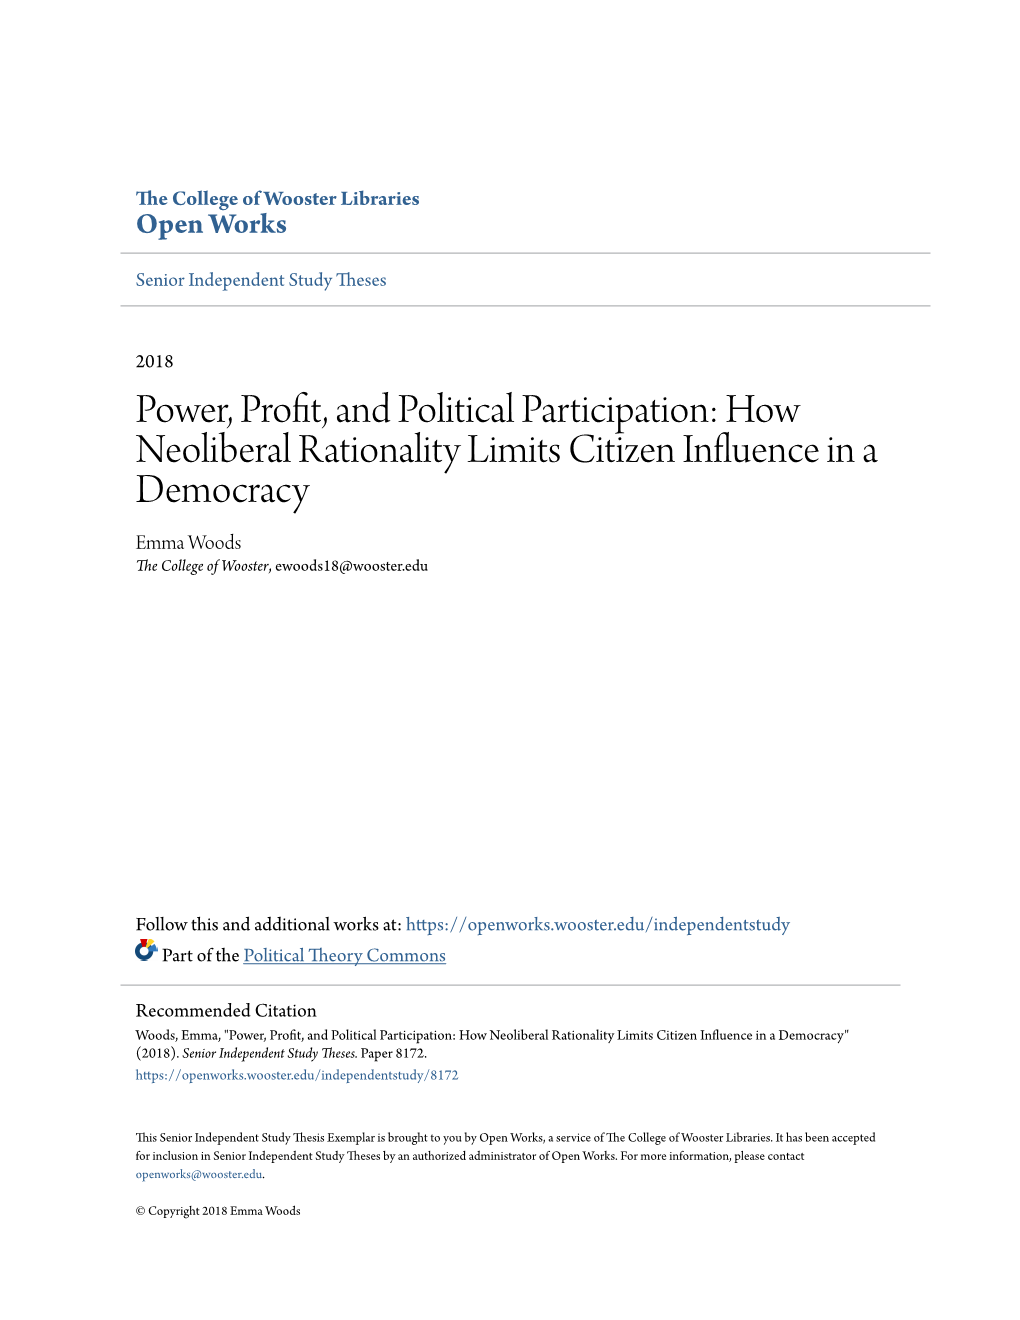 Power, Profit, and Political Participation: How Neoliberal Rationality Limits Citizen Influence in a Democracy Emma Woods the College of Wooster, Ewoods18@Wooster.Edu